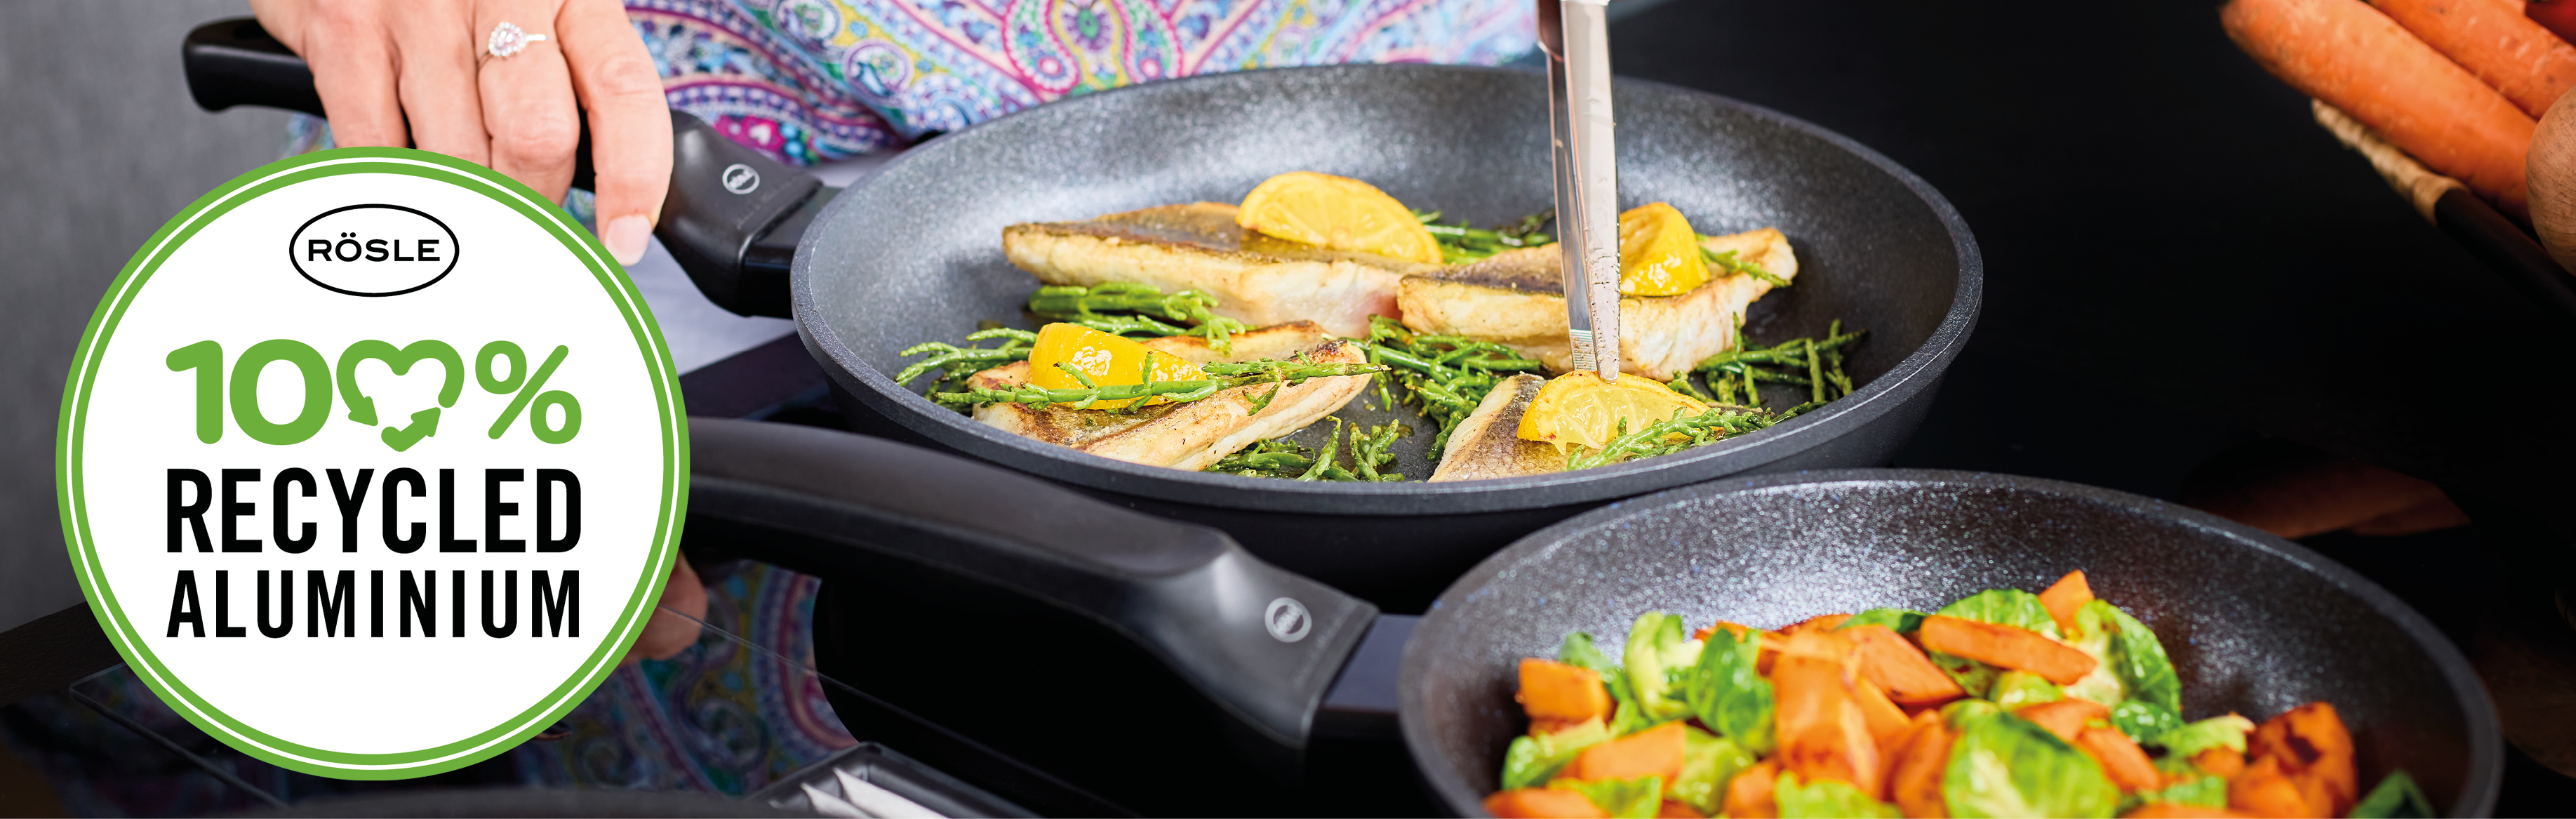 100% recycled aluminum - the Cadini cookware range